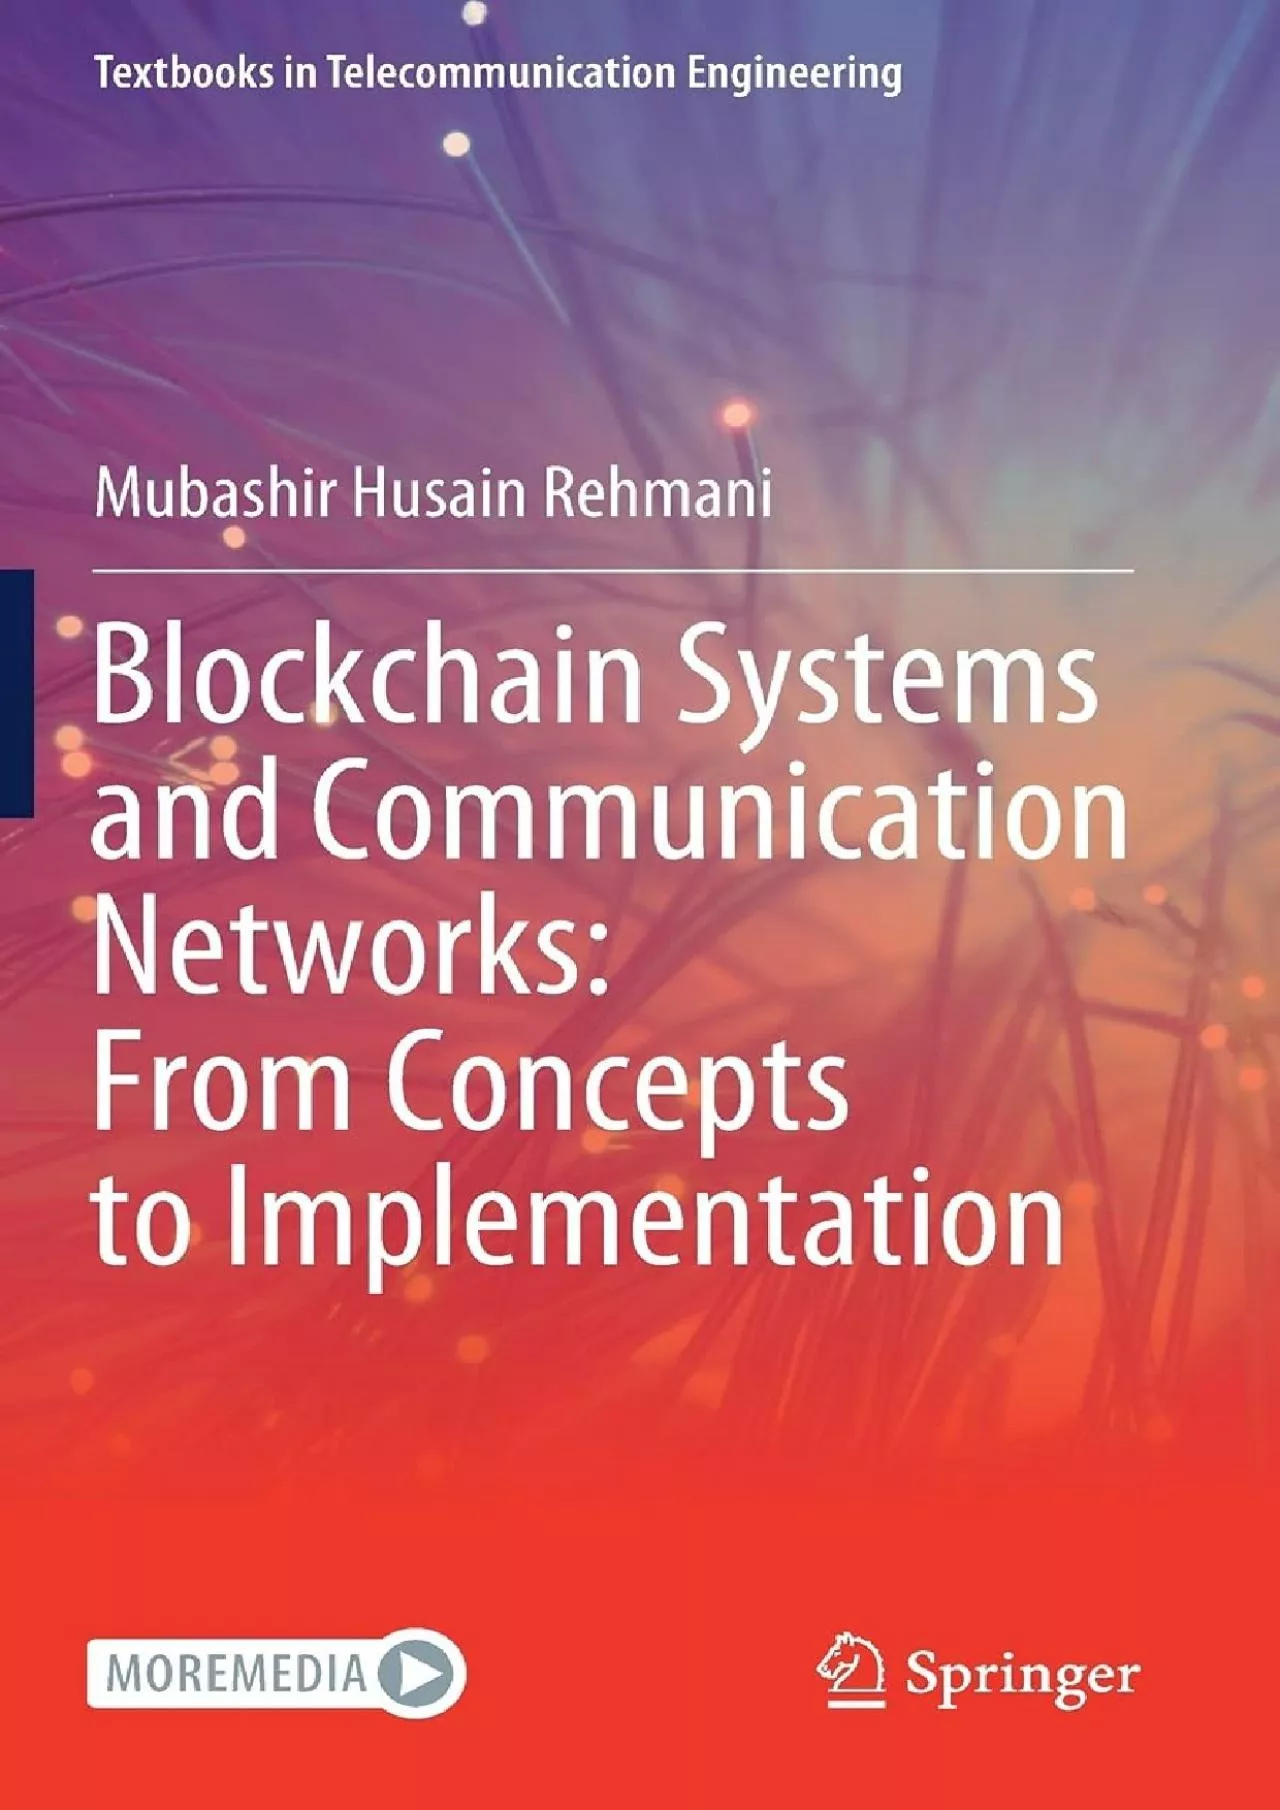 [READING BOOK]-Blockchain Systems and Communication Networks: From Concepts to Implementation